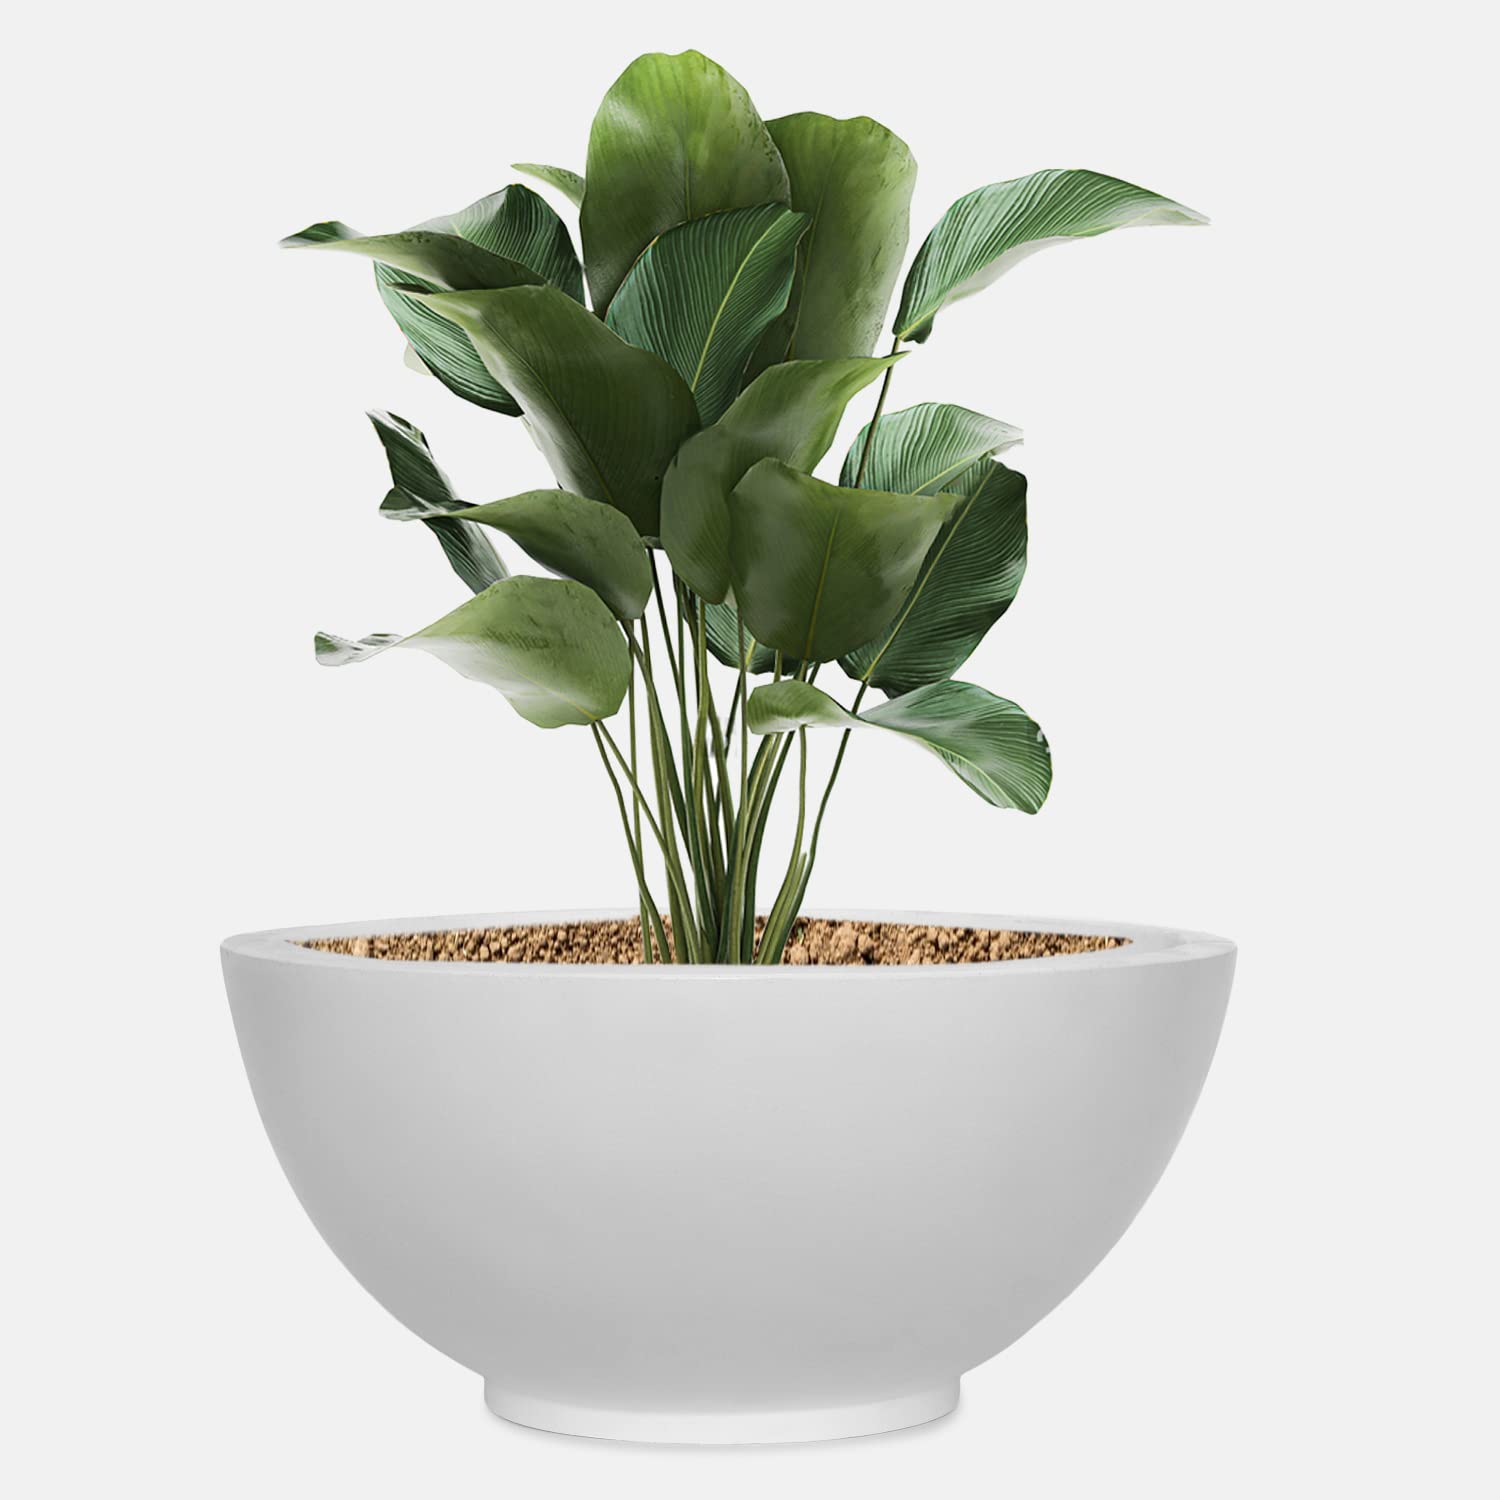 yuccabe italia fox b ktr white bowl planter pot 18 inches german plastic polymer planter pot suitable for garden indoor and outdoor